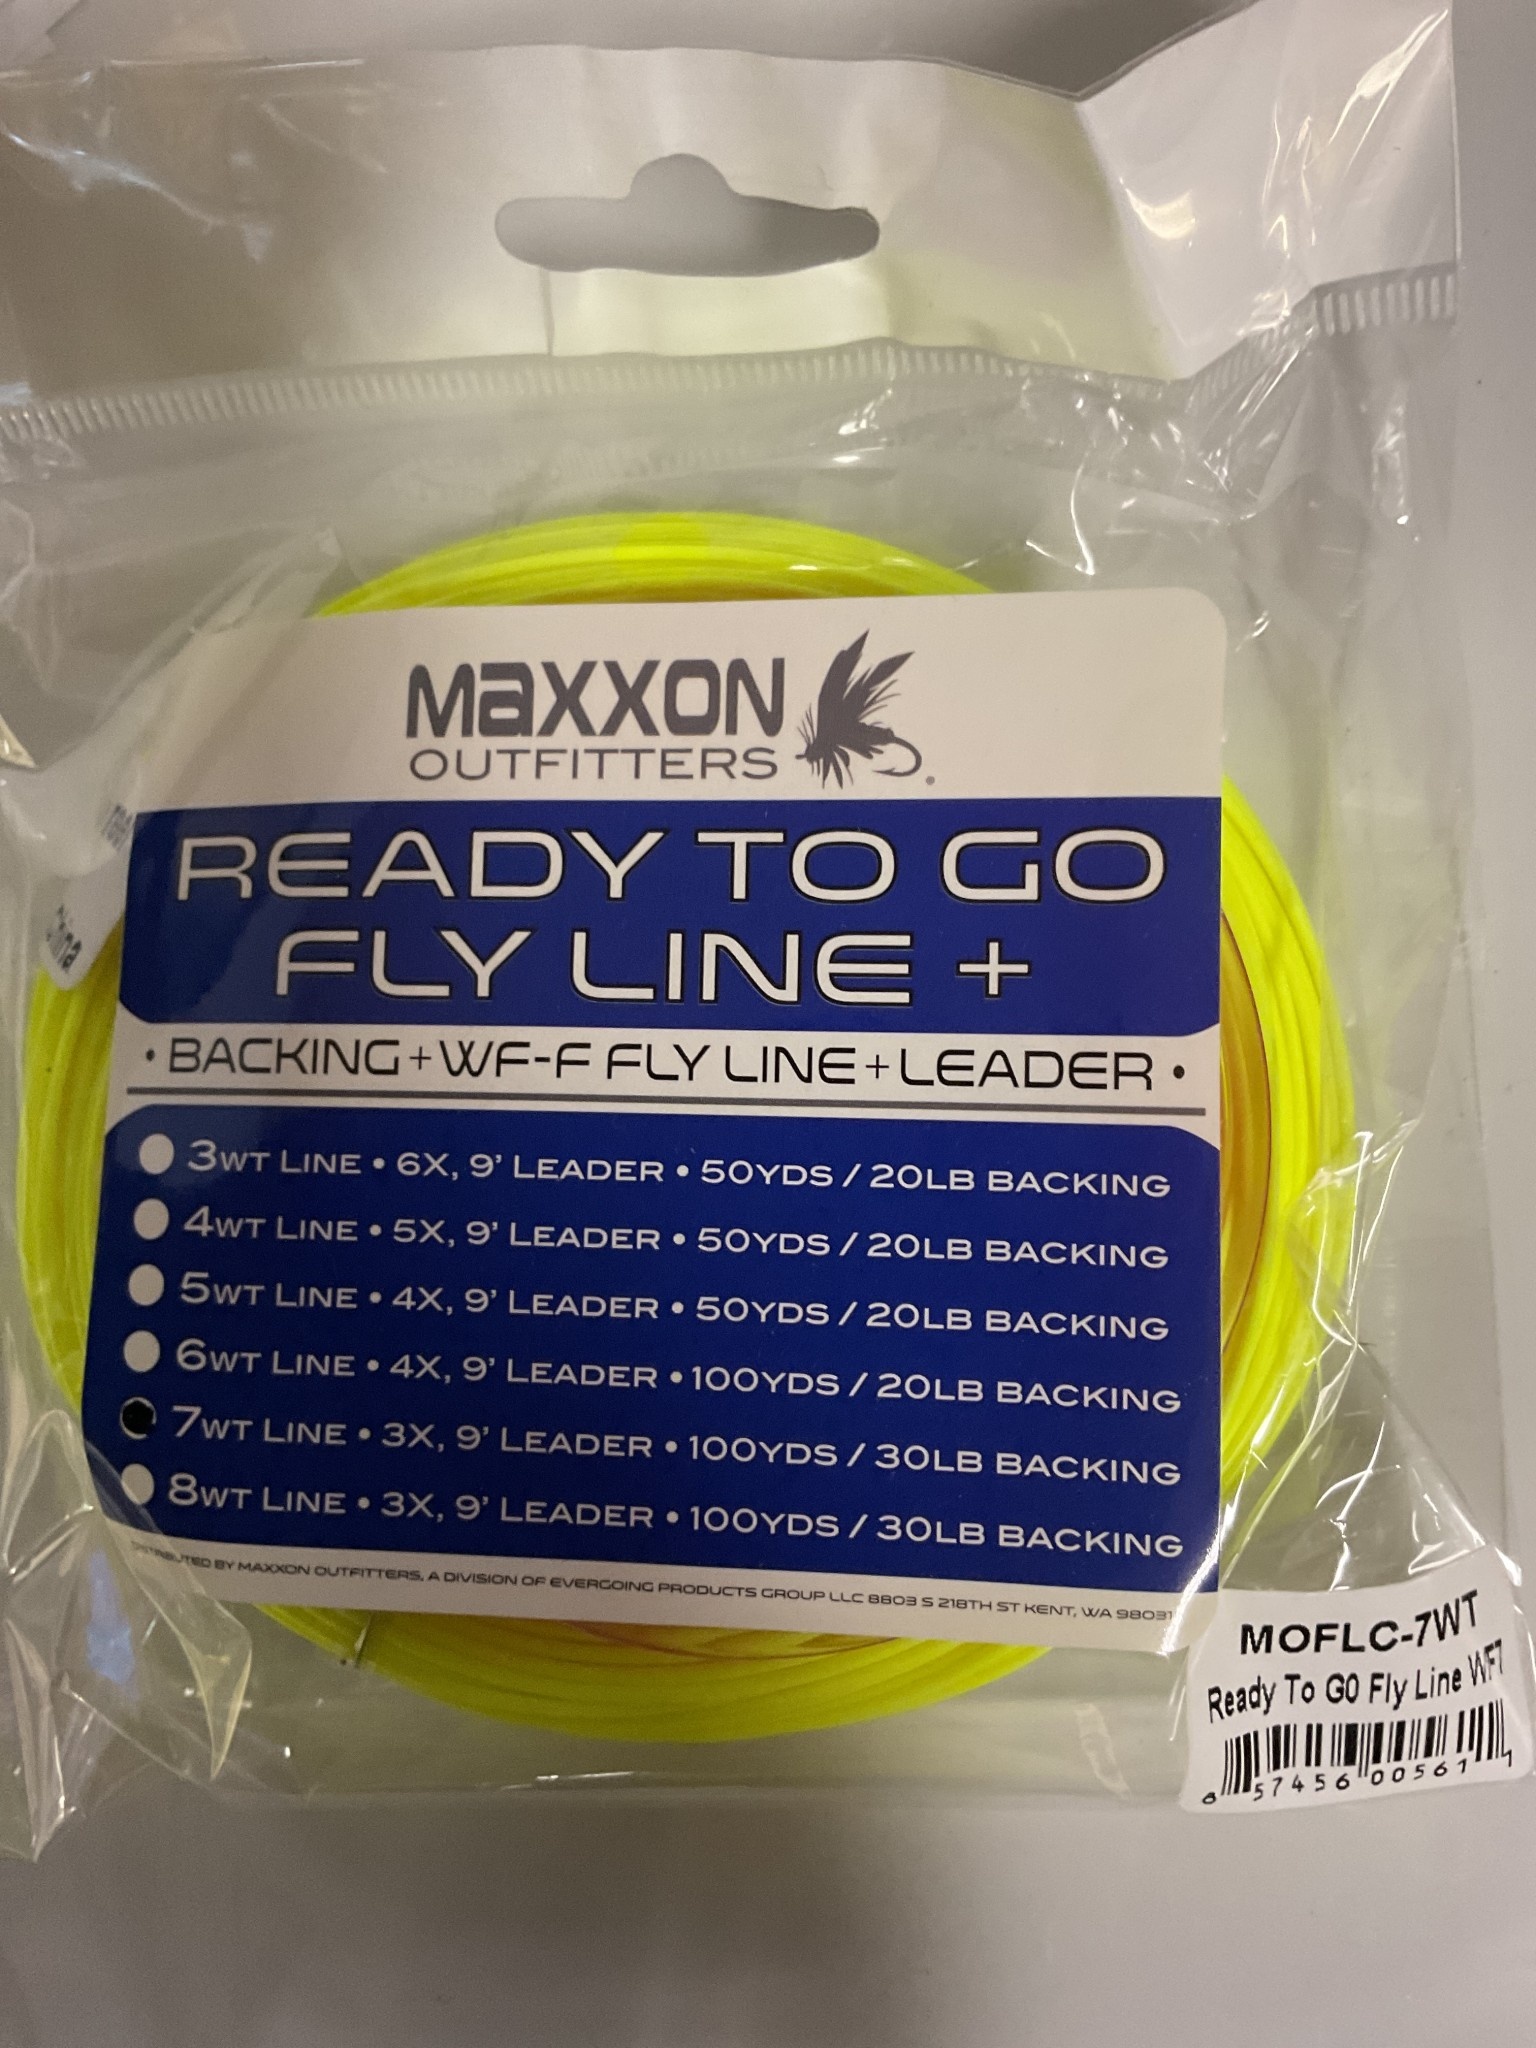 Maxxon Outfitters WF7F READY TO GO FLY LINE (BACKING + FLY LINE + LEADER) -  All Seasons Sports